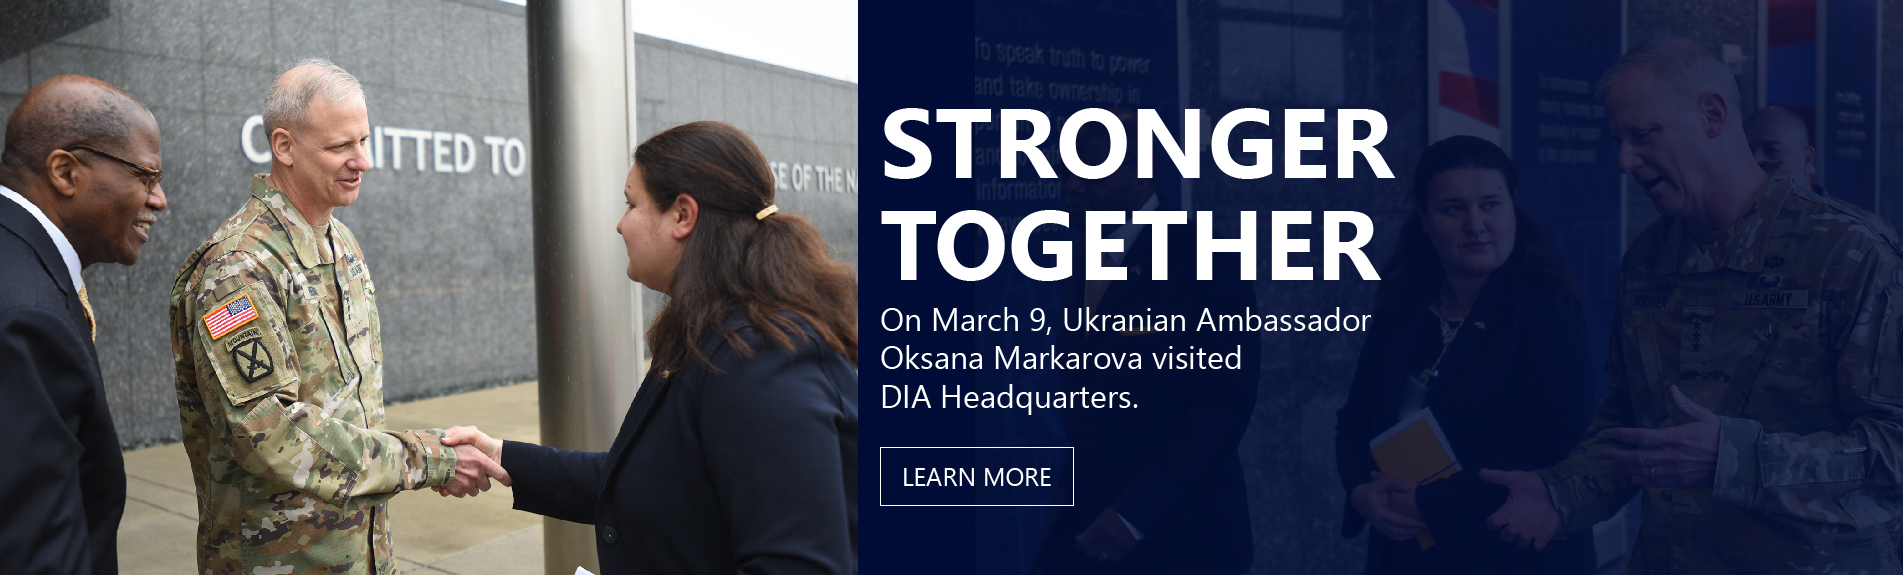 Feature graphic image of LGT Scott Berrier meeting and walking with the Ukranian Ambassador. Oksana Markarova. Large title. Stronger Together. Subtext. On March 9, Ukranian Ambassador Oksana Markarova visited D.I.A. Headquarters. Button below that reads. Learn More.